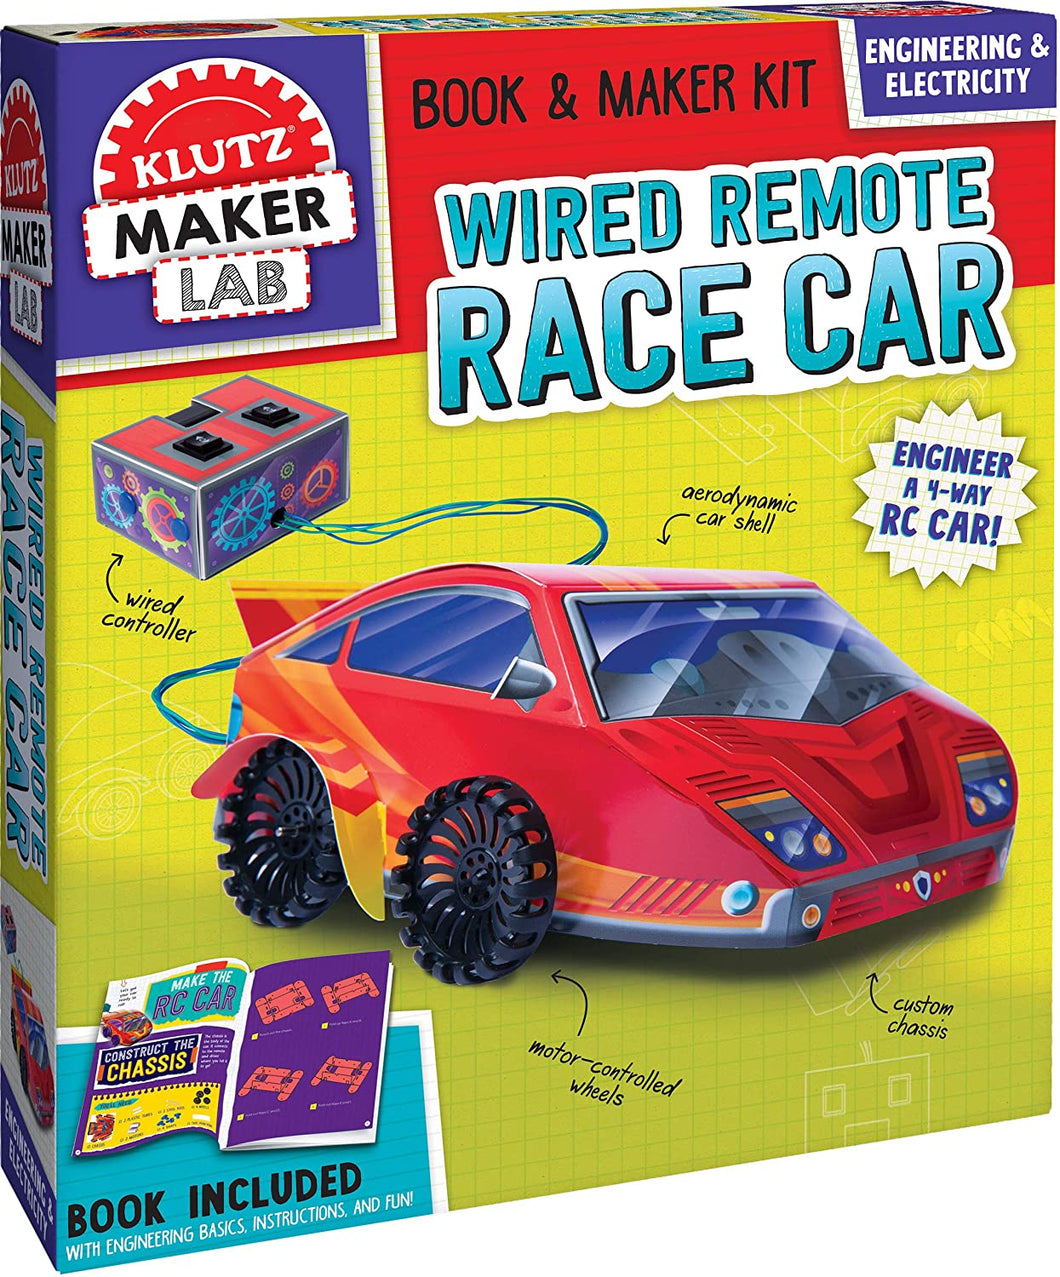 Klutz Wired Remote Race Car